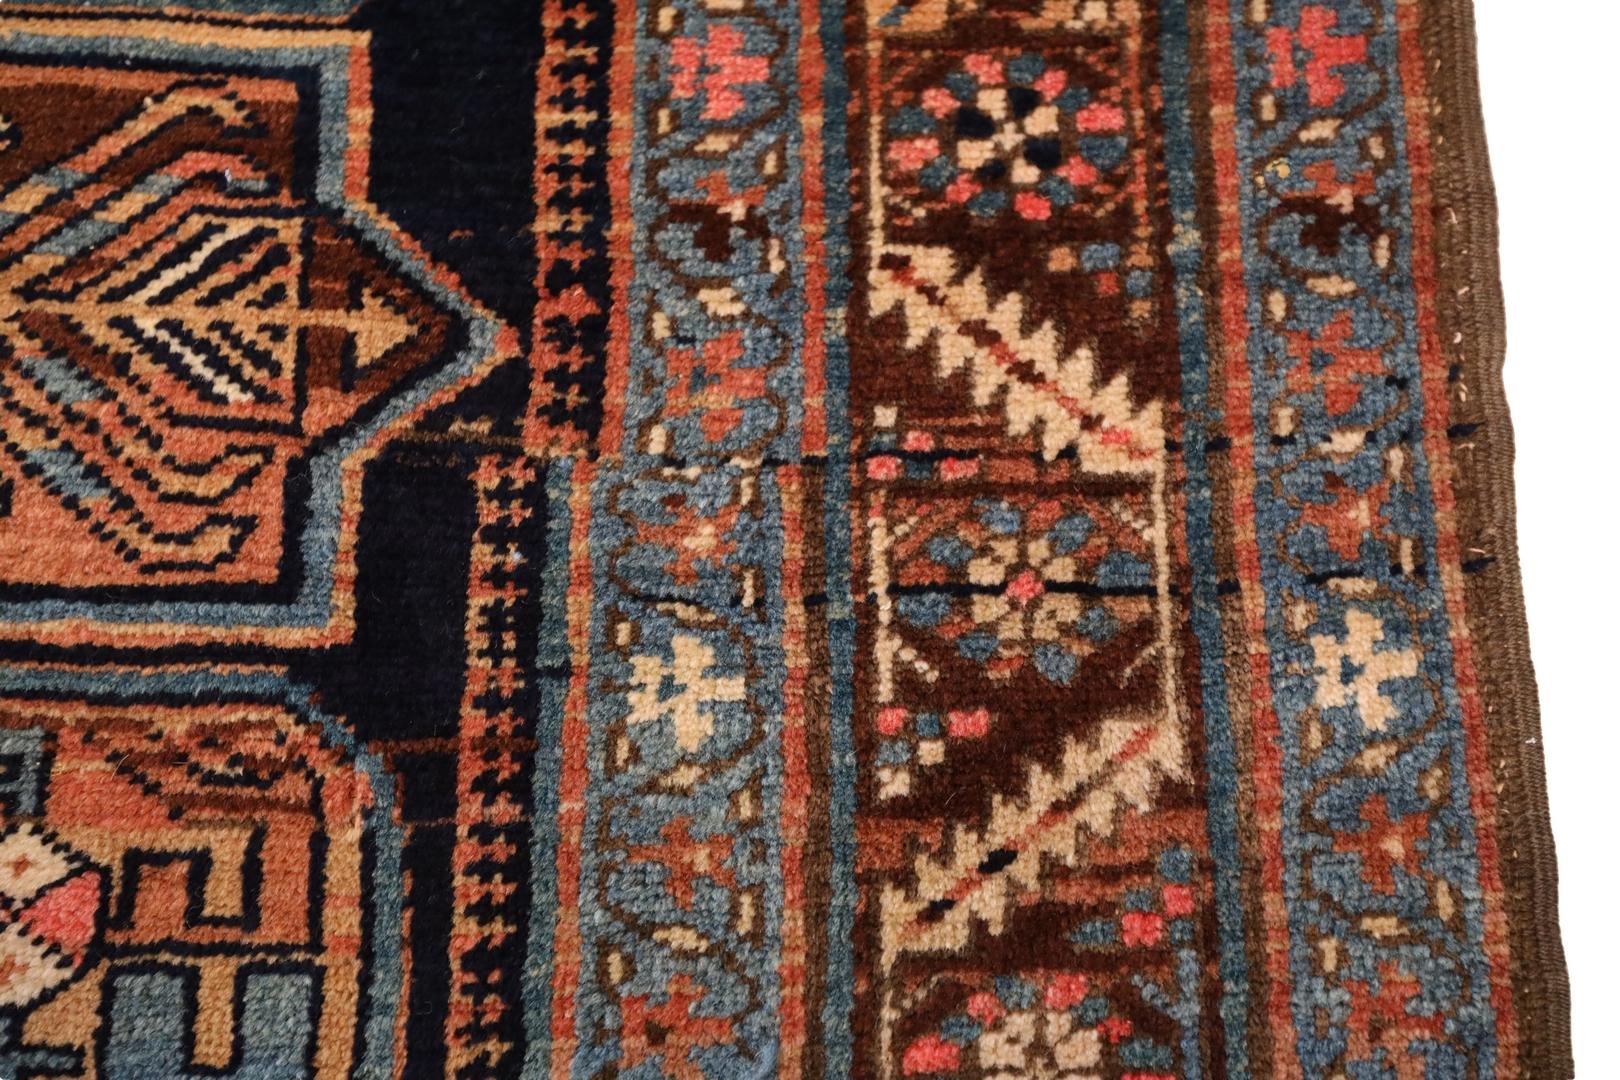 North-Western Persian Antique runner - 3'3